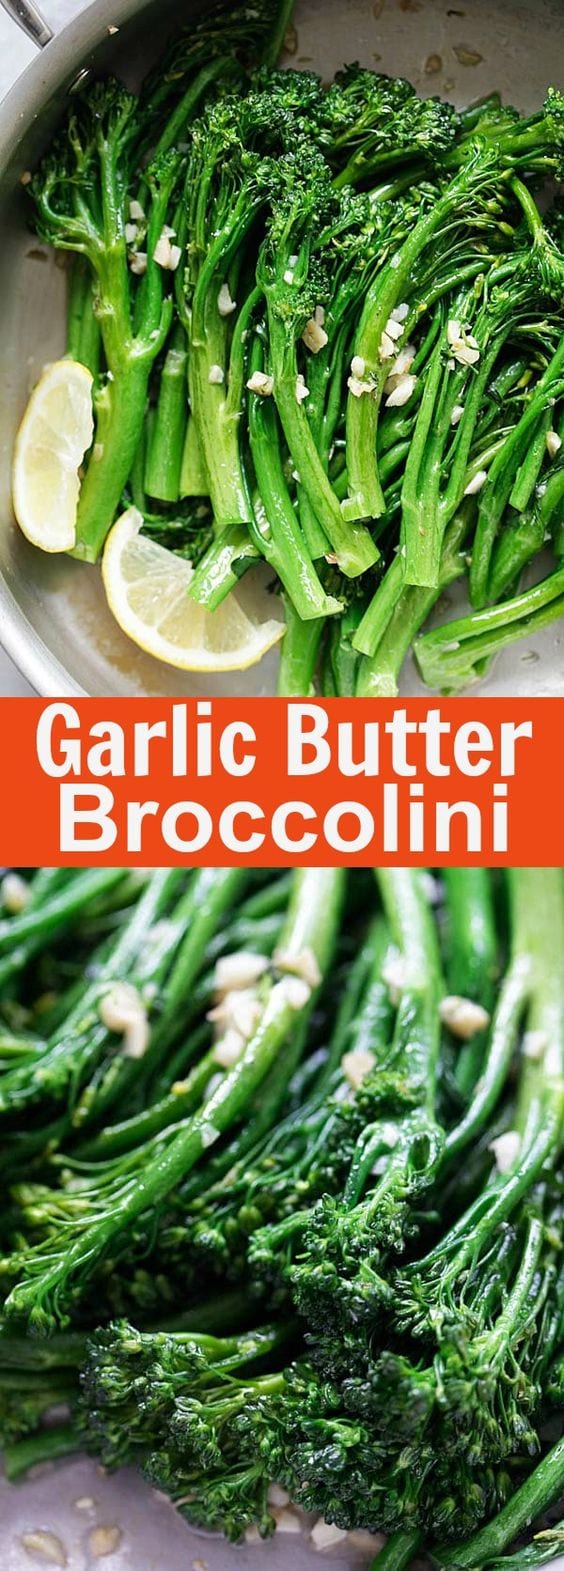 Garlic Butter Sauteed Broccolini - the easiest & healthiest broccolini recipe ever, takes only 10 mins to make. Quick, fresh, and delicious | rasamalaysia.com